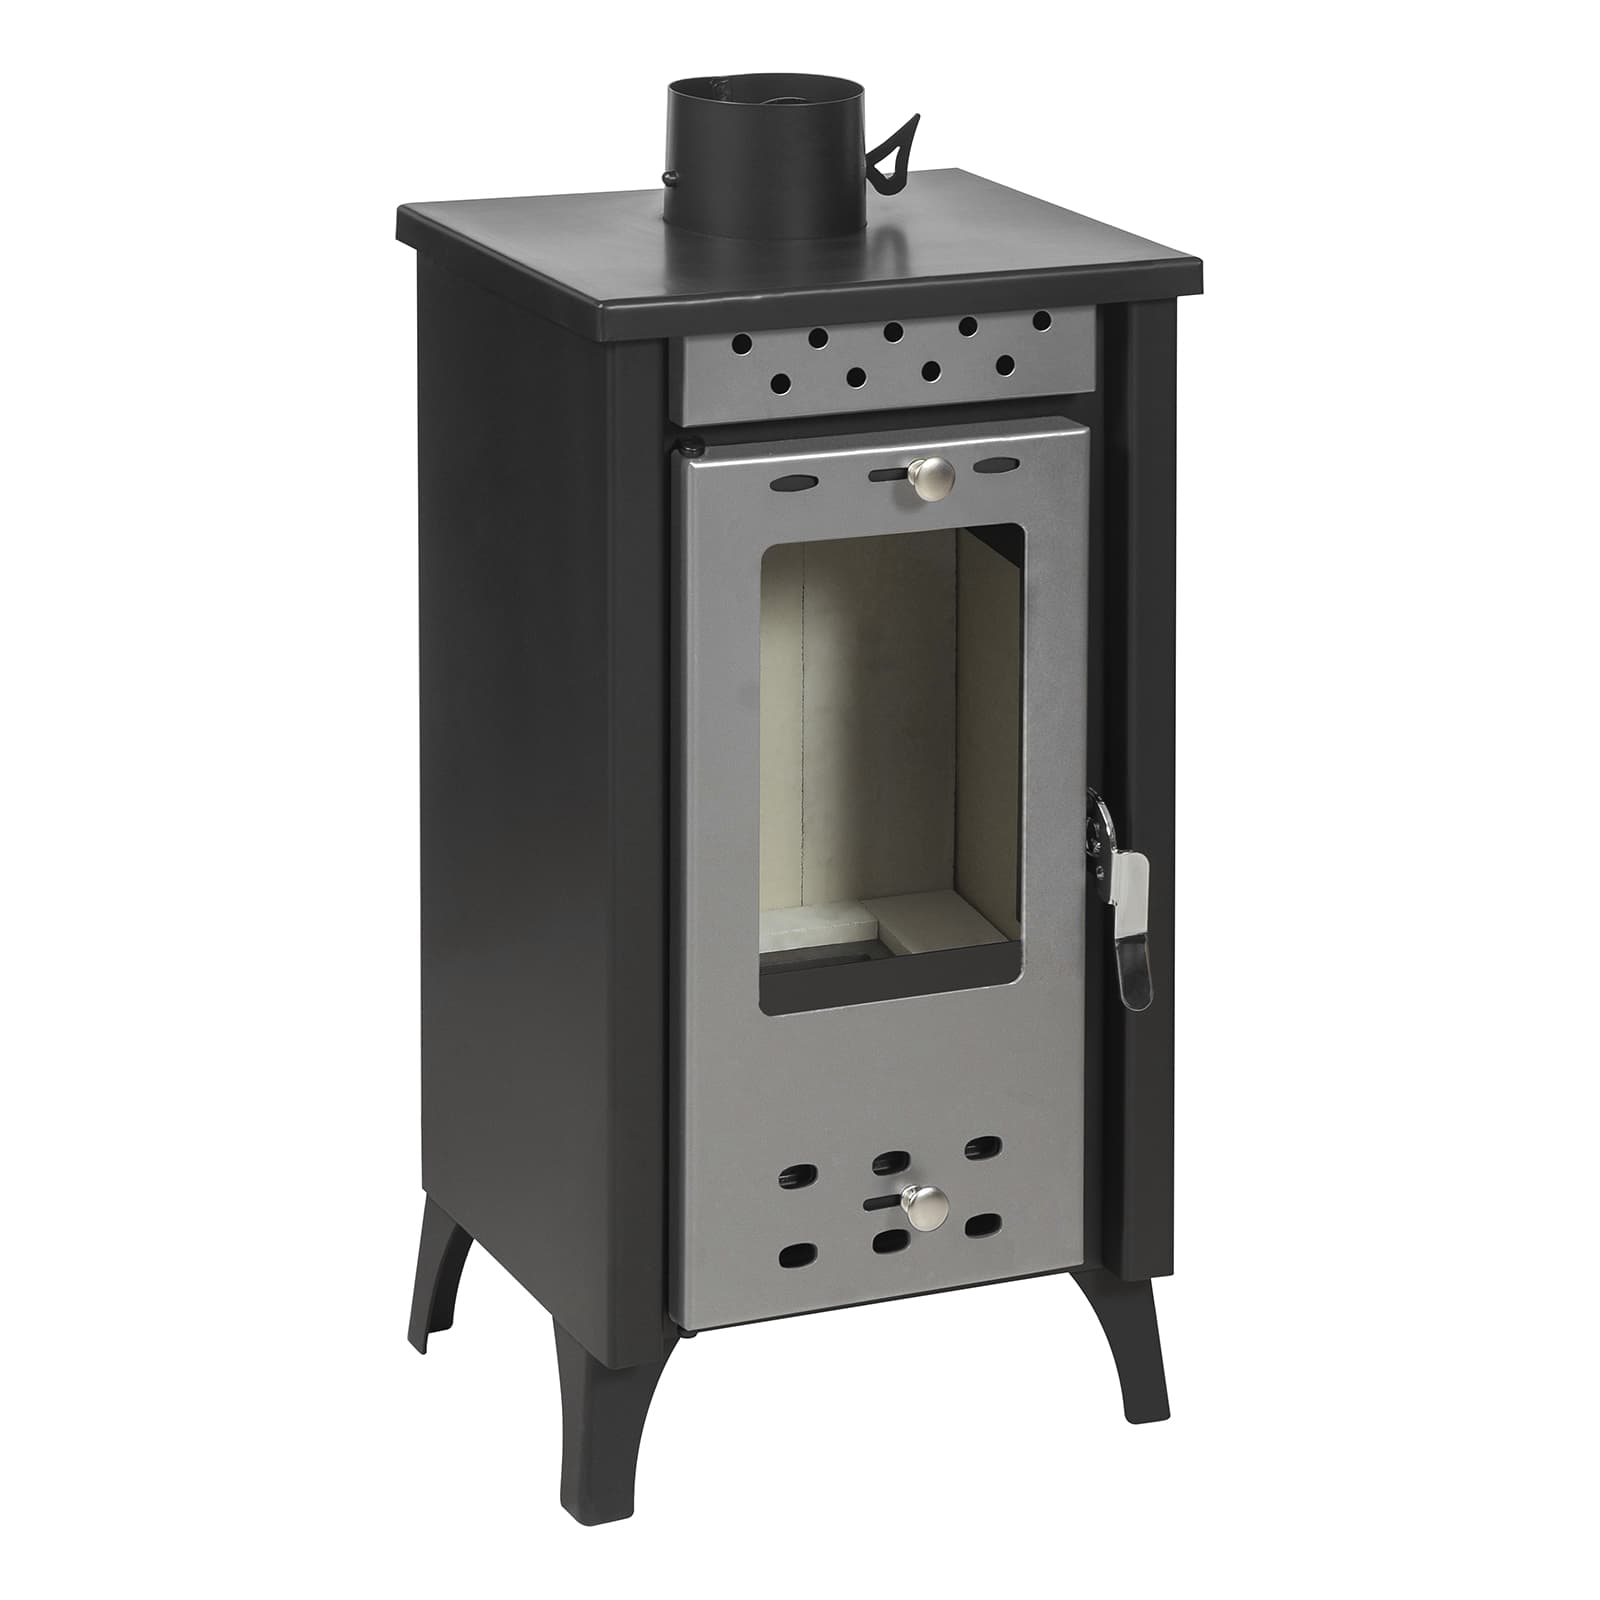 Holzofen 7,7 kW – silber